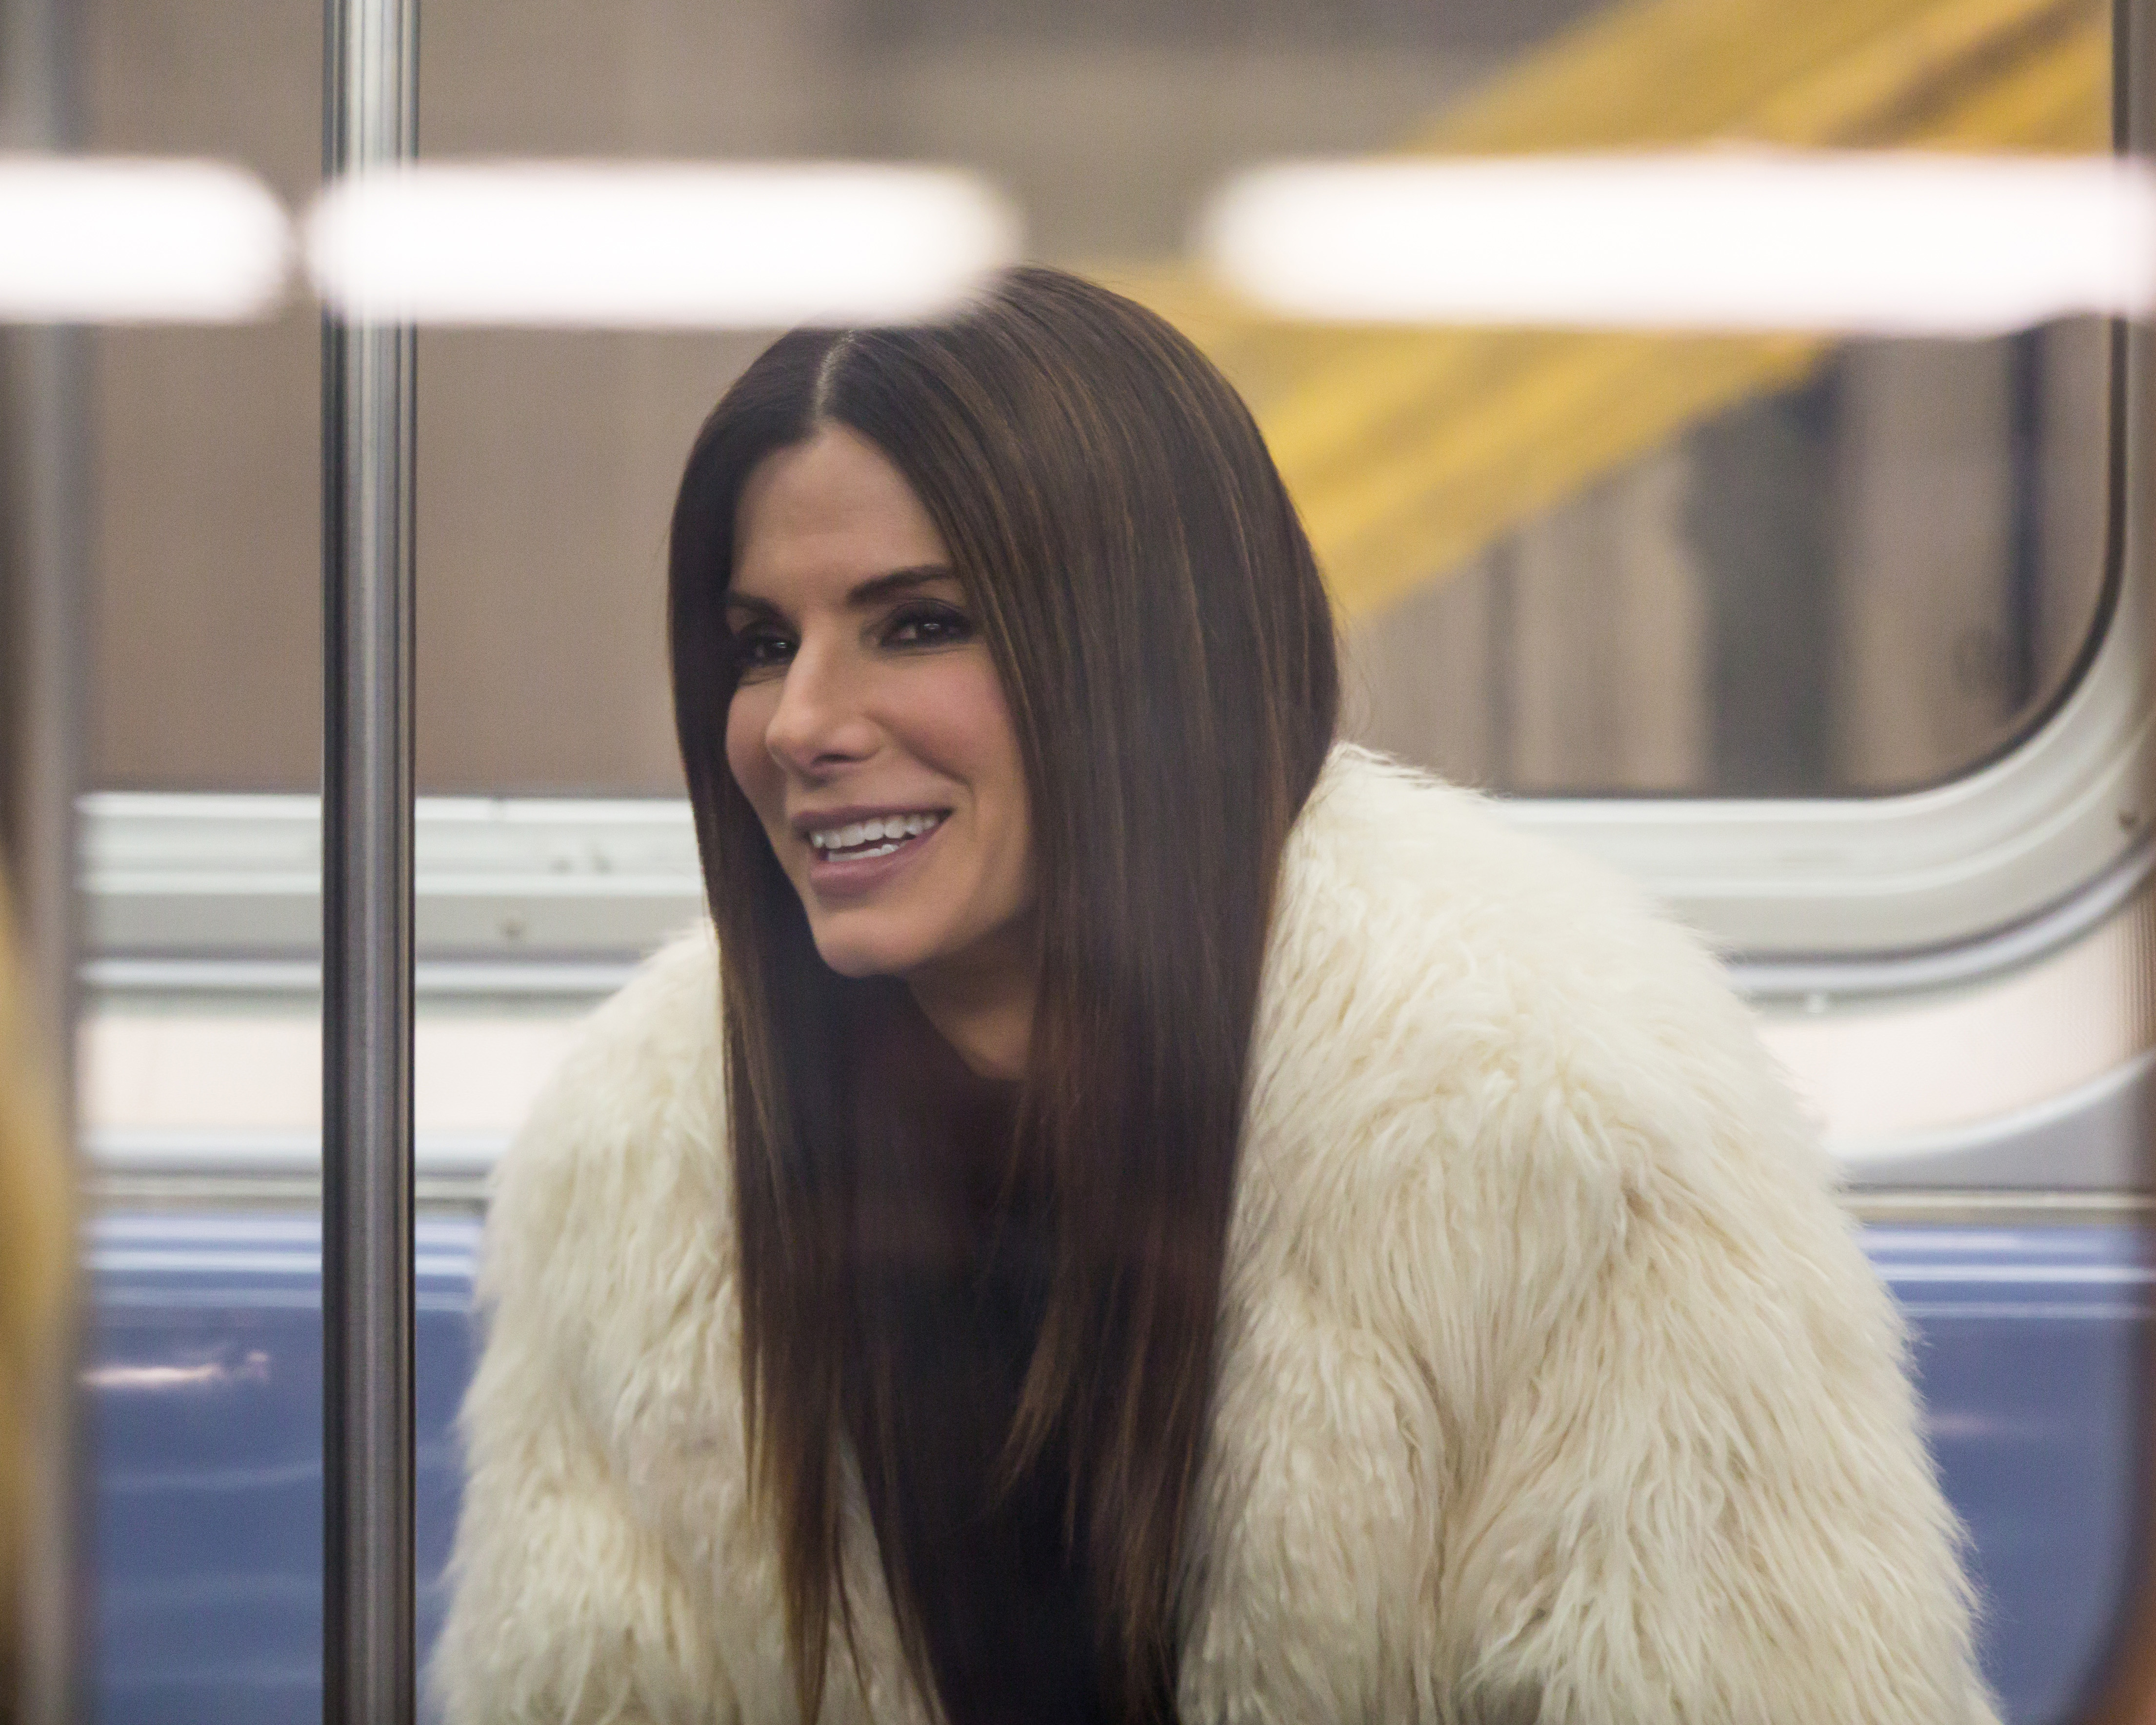 Sandra Bullock during the filming of "Ocean's 8" on December 3, 2016 in New York City | Source: Getty Images